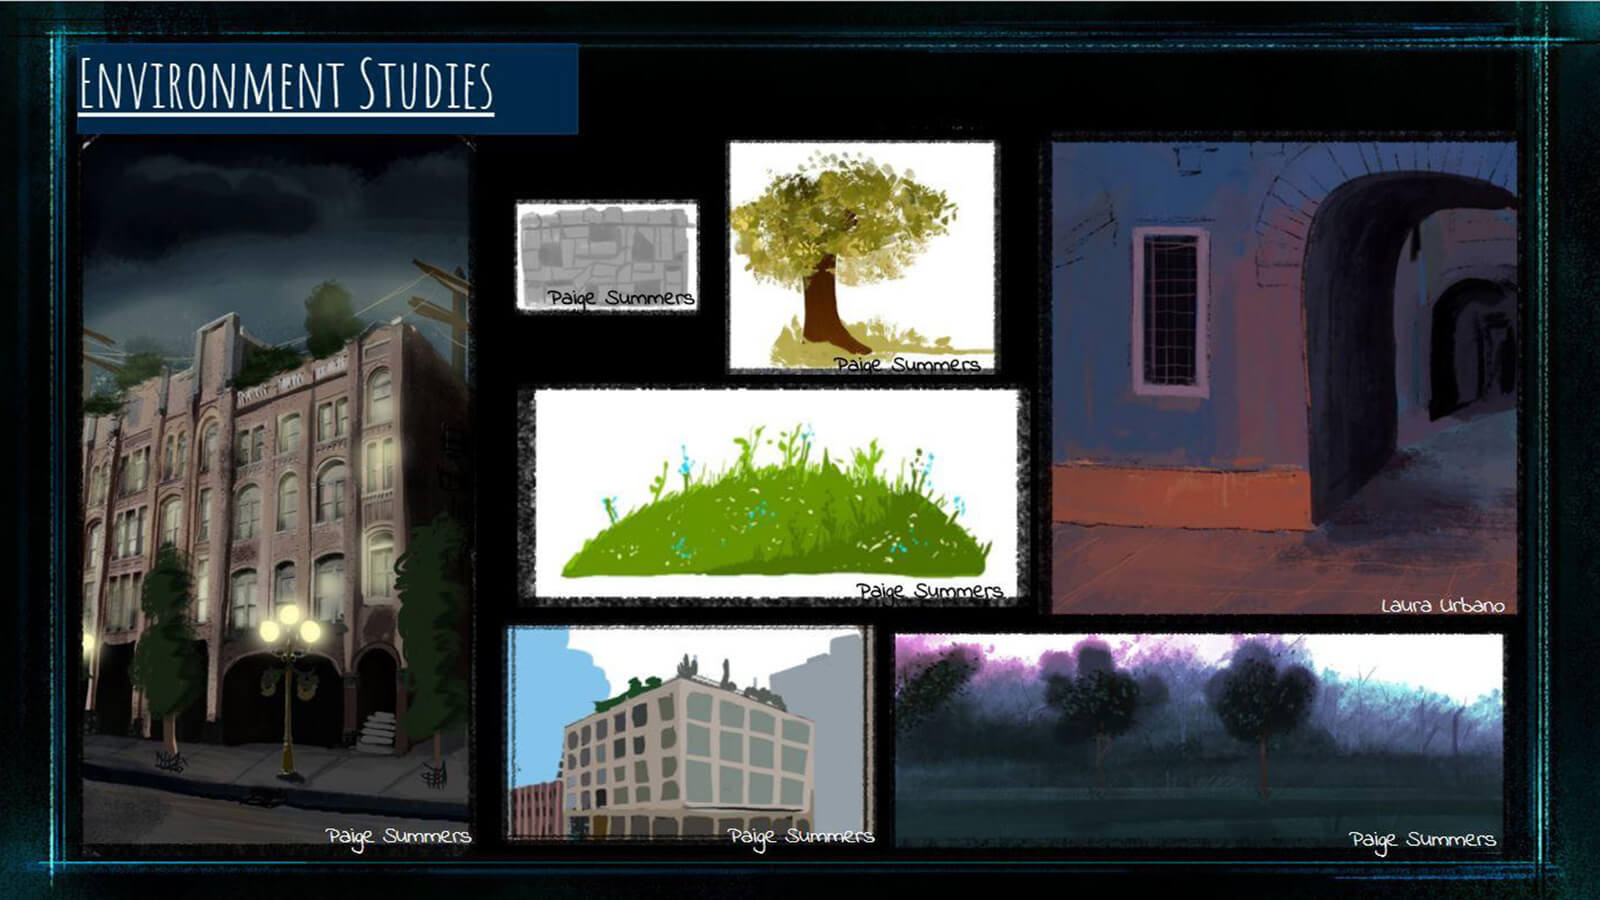 An "Environment Studies" slide, showing development stage drawings of background elements in the film.